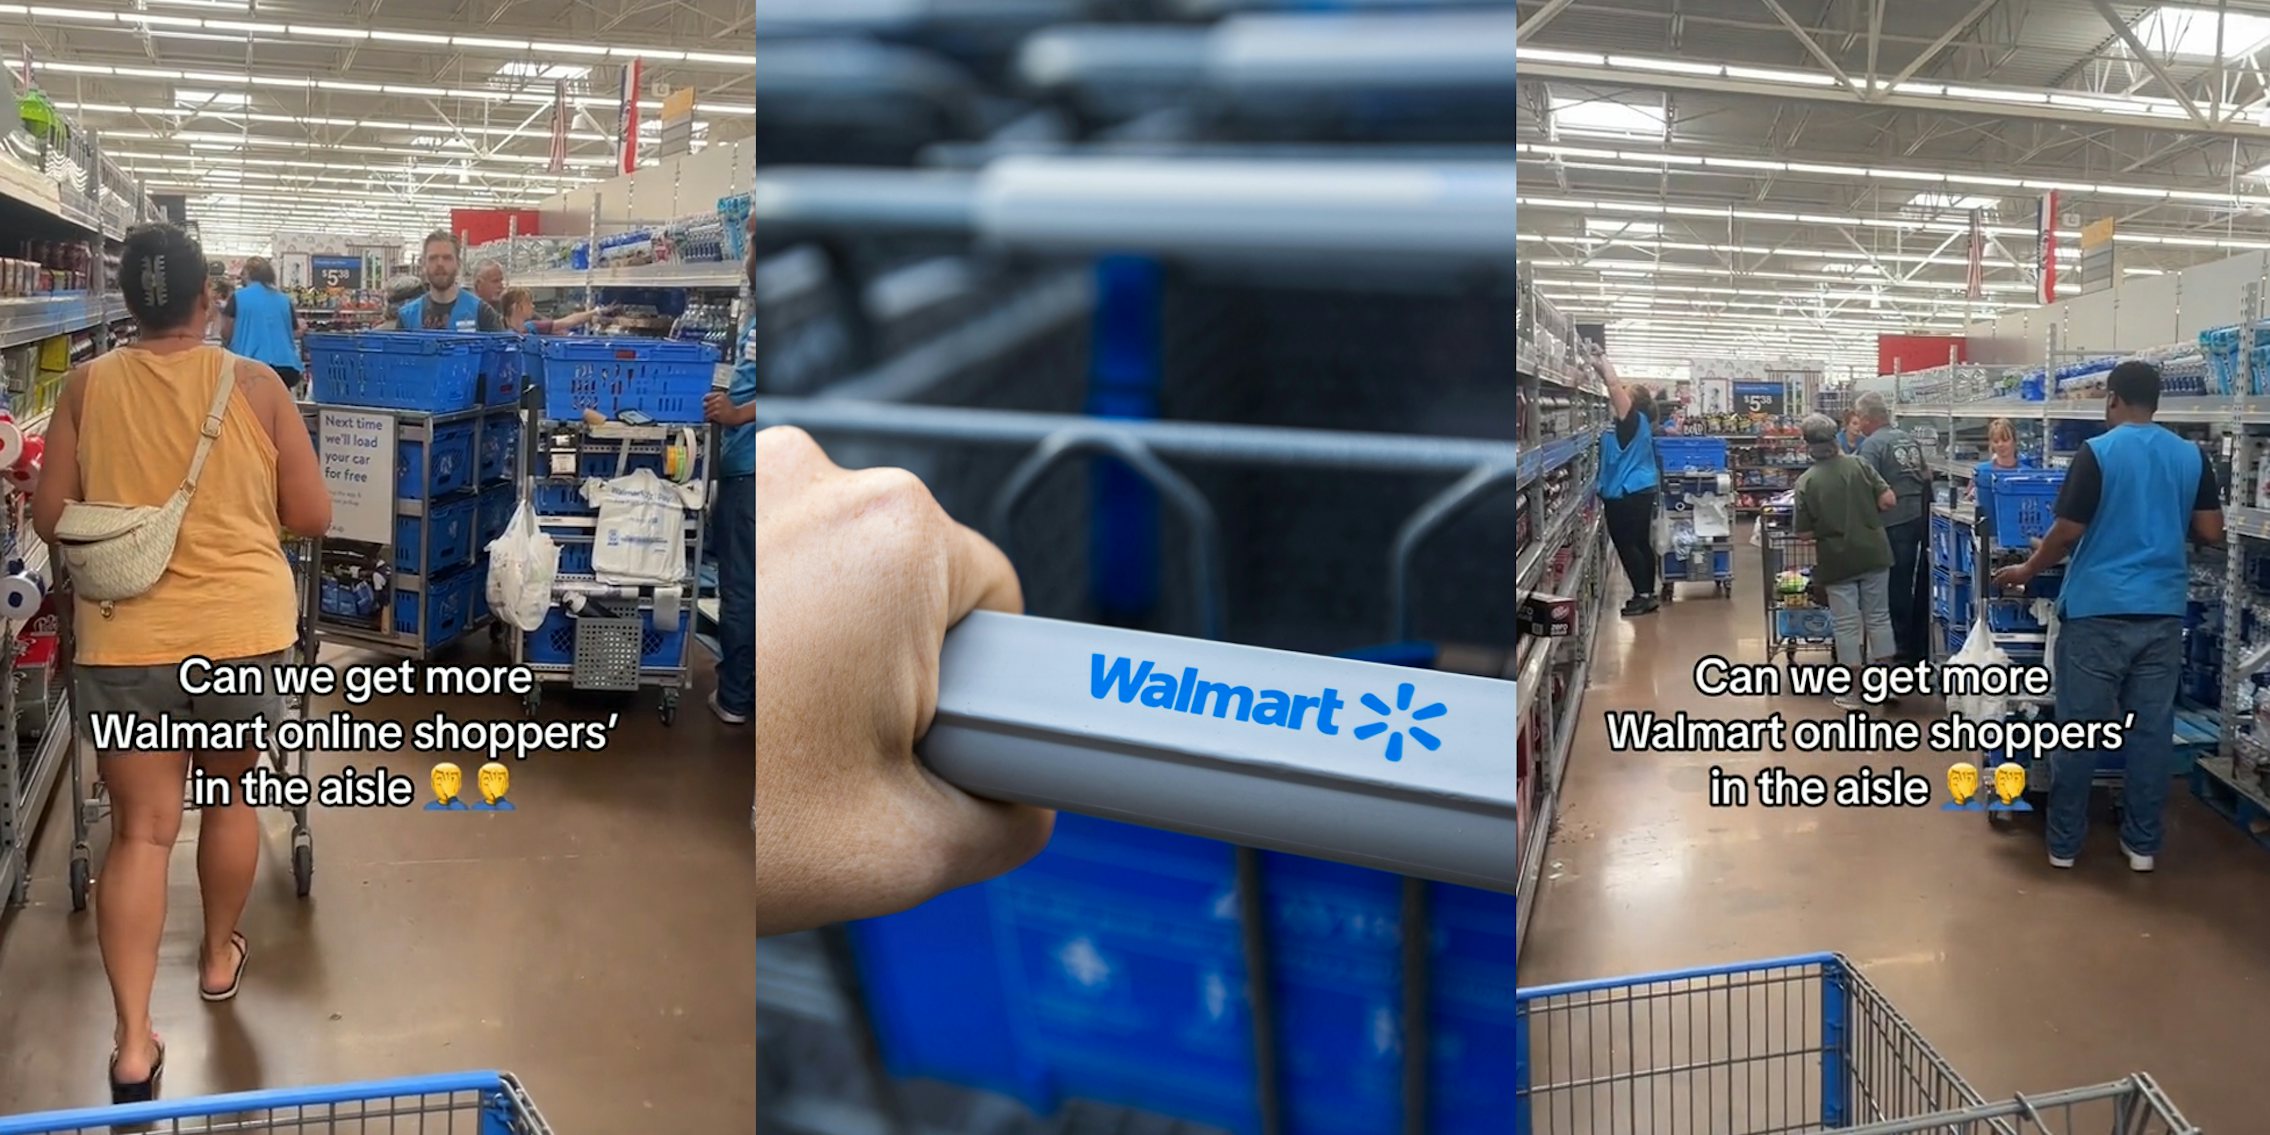 Walmart shoppers in aisle with caption 'Can we get more Walmart online shoppers' in the aisle' (l) hand on Walmart branded cart (c) Walmart shoppers in aisle with caption 'Can we get more Walmart online shoppers' in the aisle' (r)